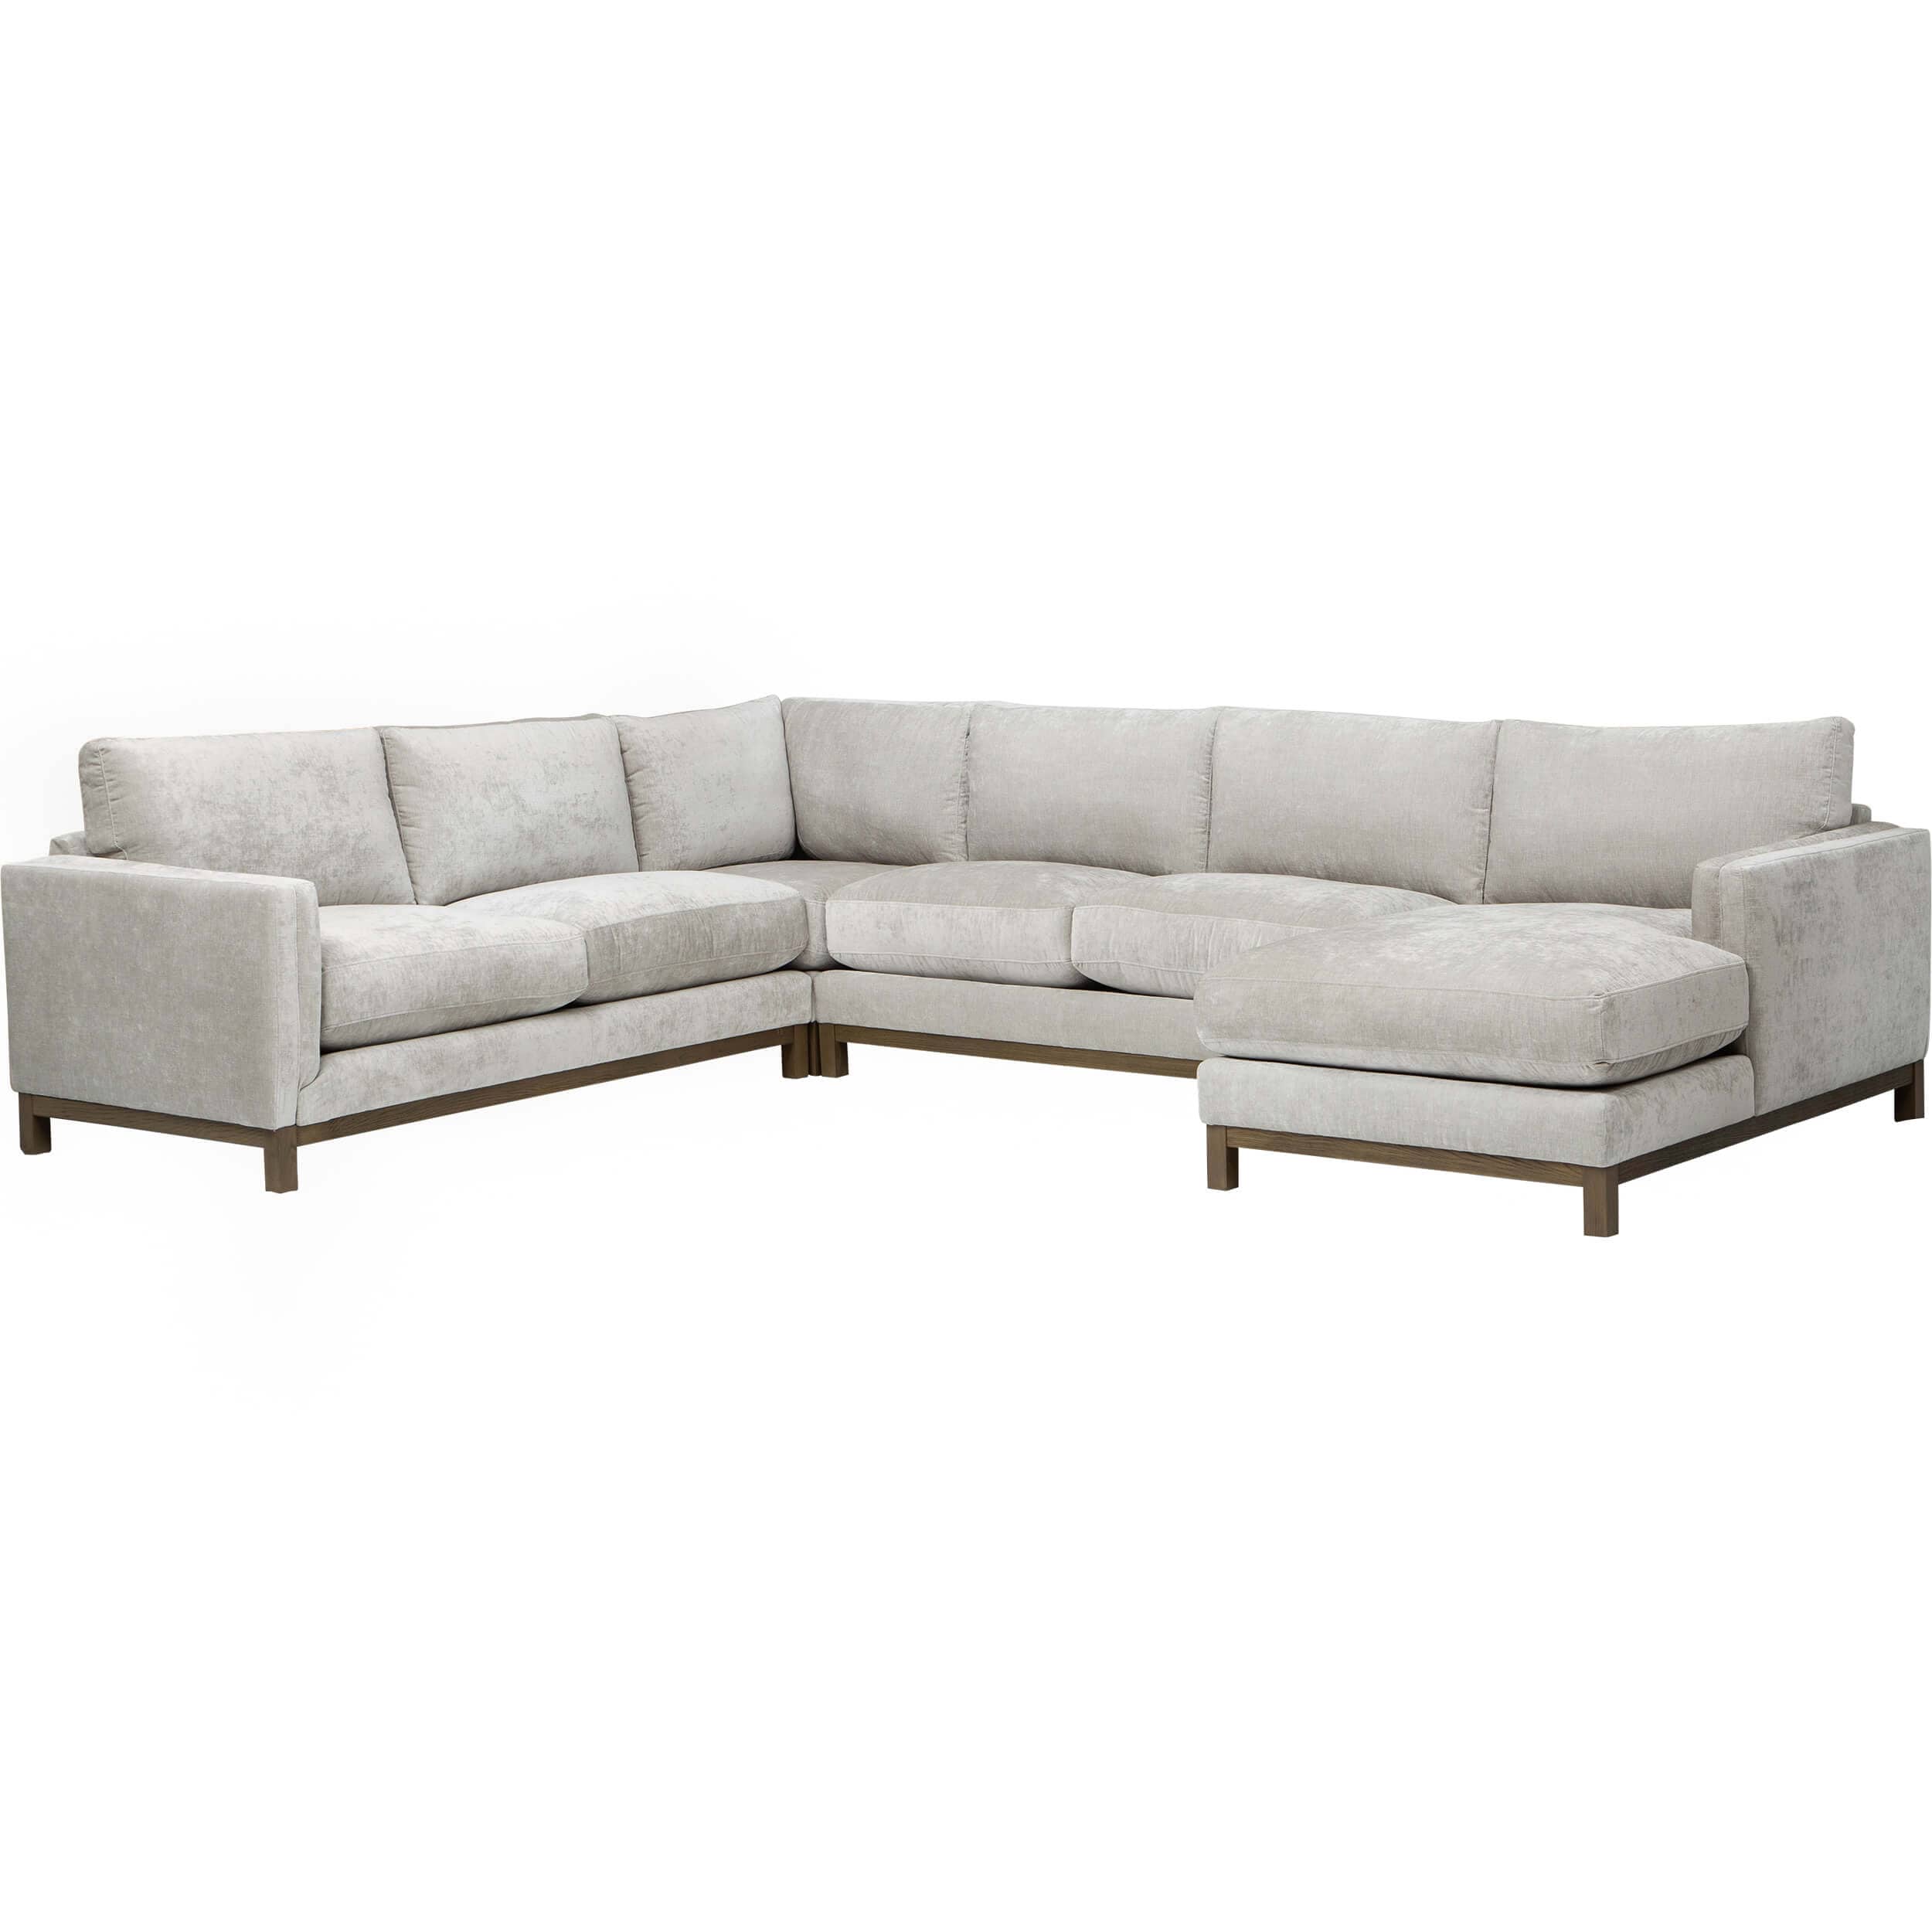 Image of Reeva 4 Piece Sectional, Contessa Oyster